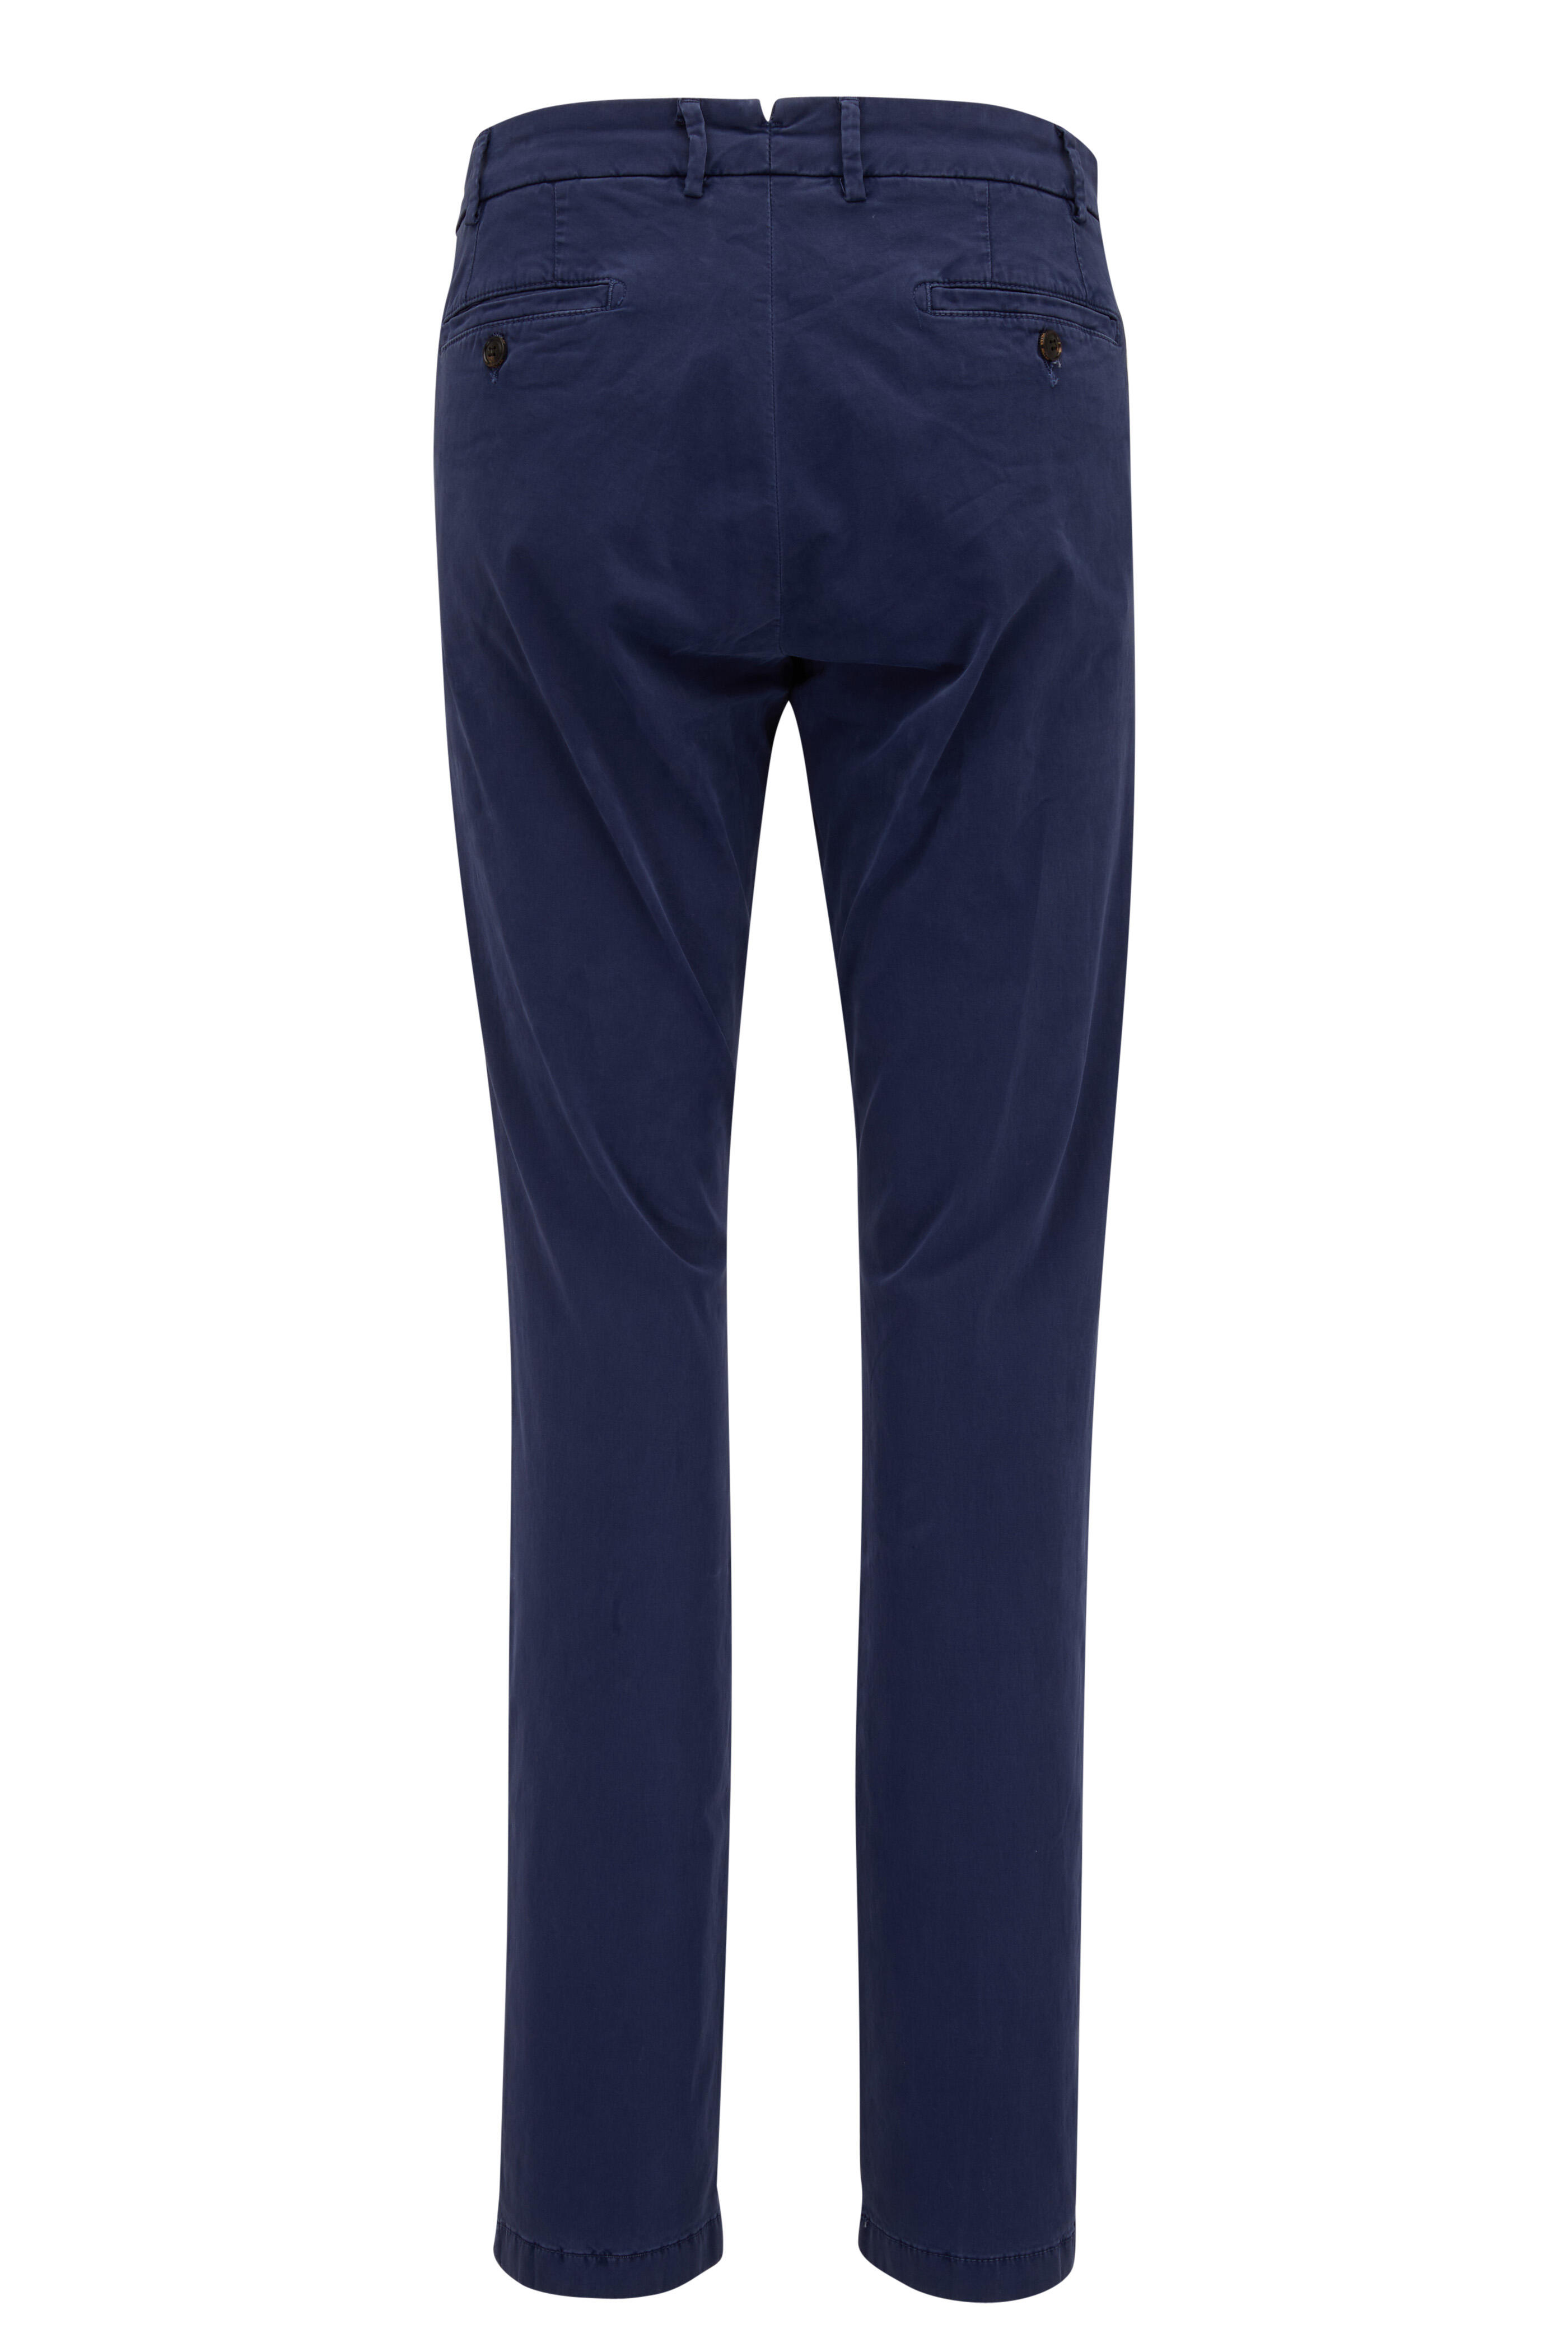 Peter Millar - Concorde Washed Navy Flat Front Garment Dyed Pant